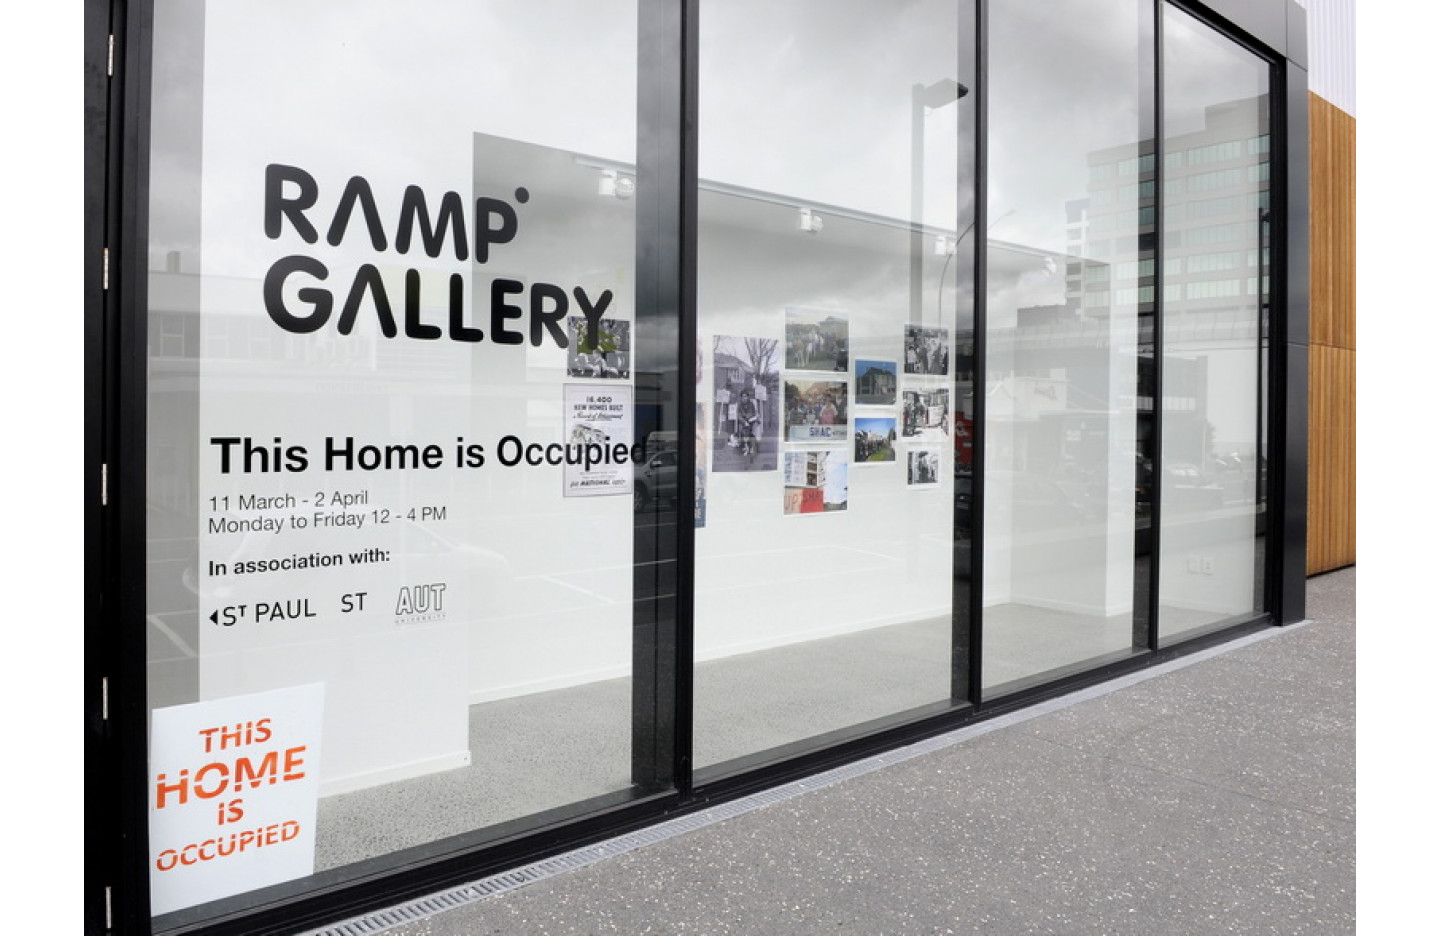 This Home is Occupied, Ramp Gallery (2015)